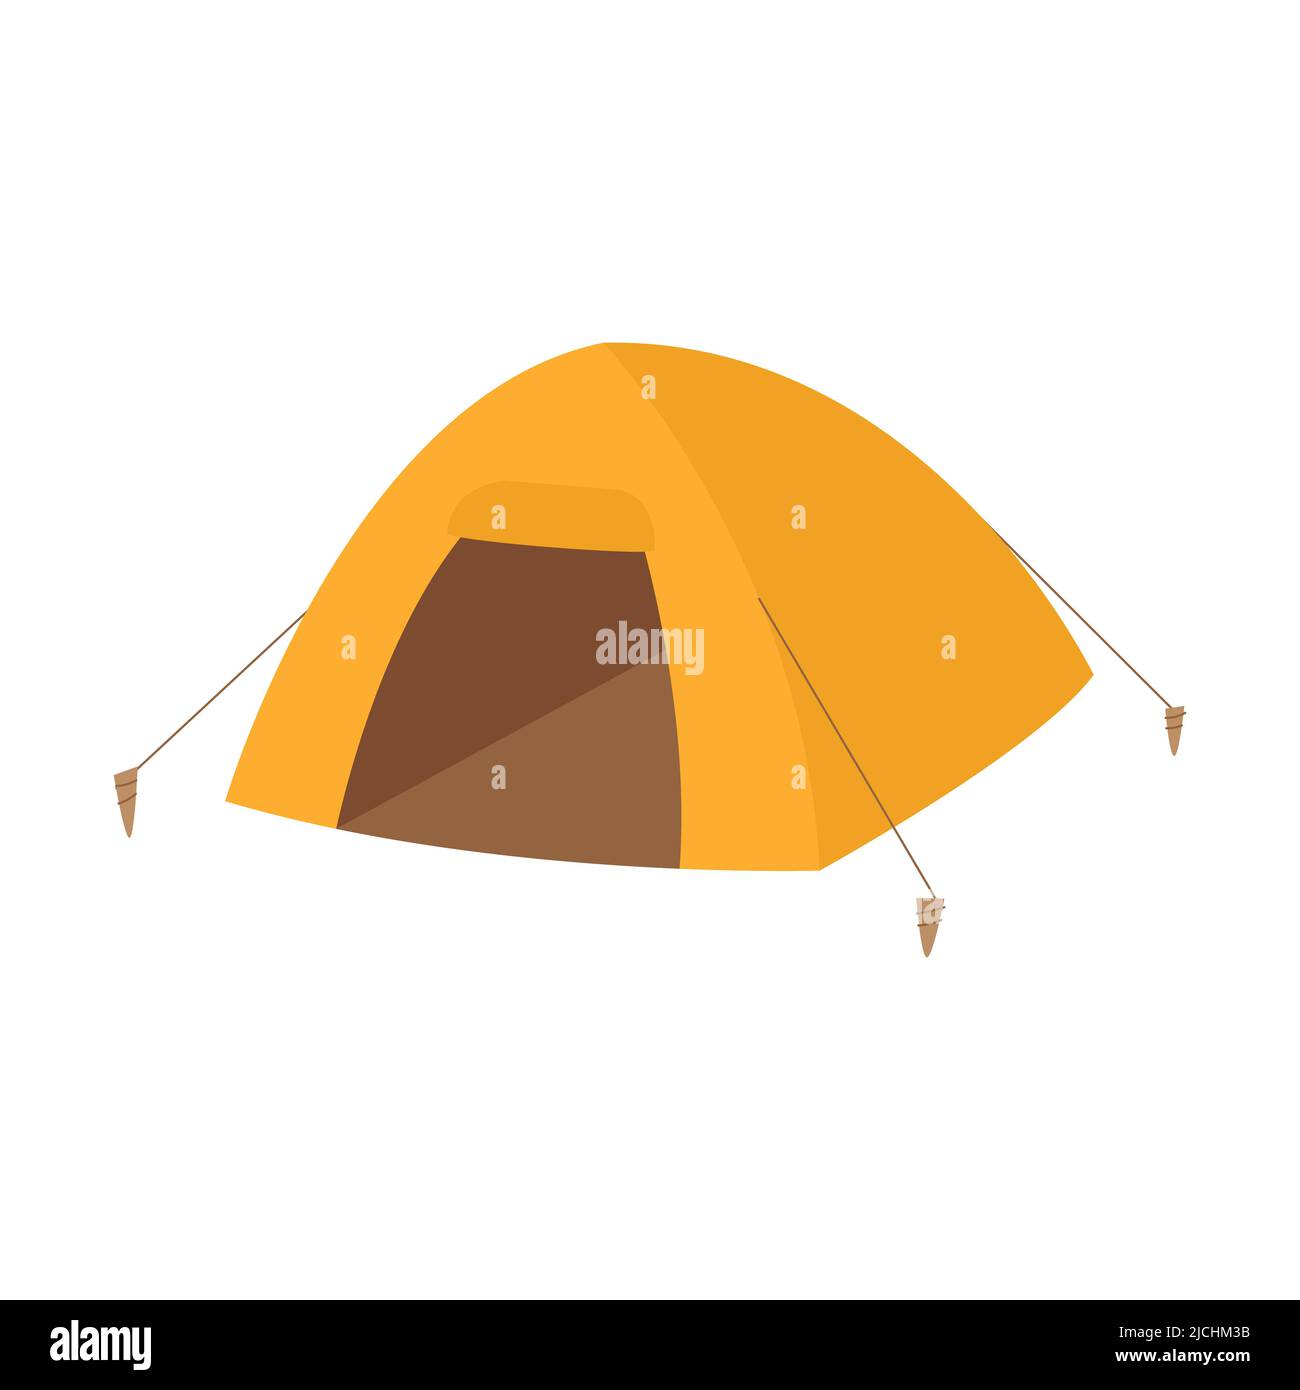 Camping tent. Equipment for picnics, outdoor recreation, travel, hiking. Flat vector illustration isolated on a white background. Stock Vector